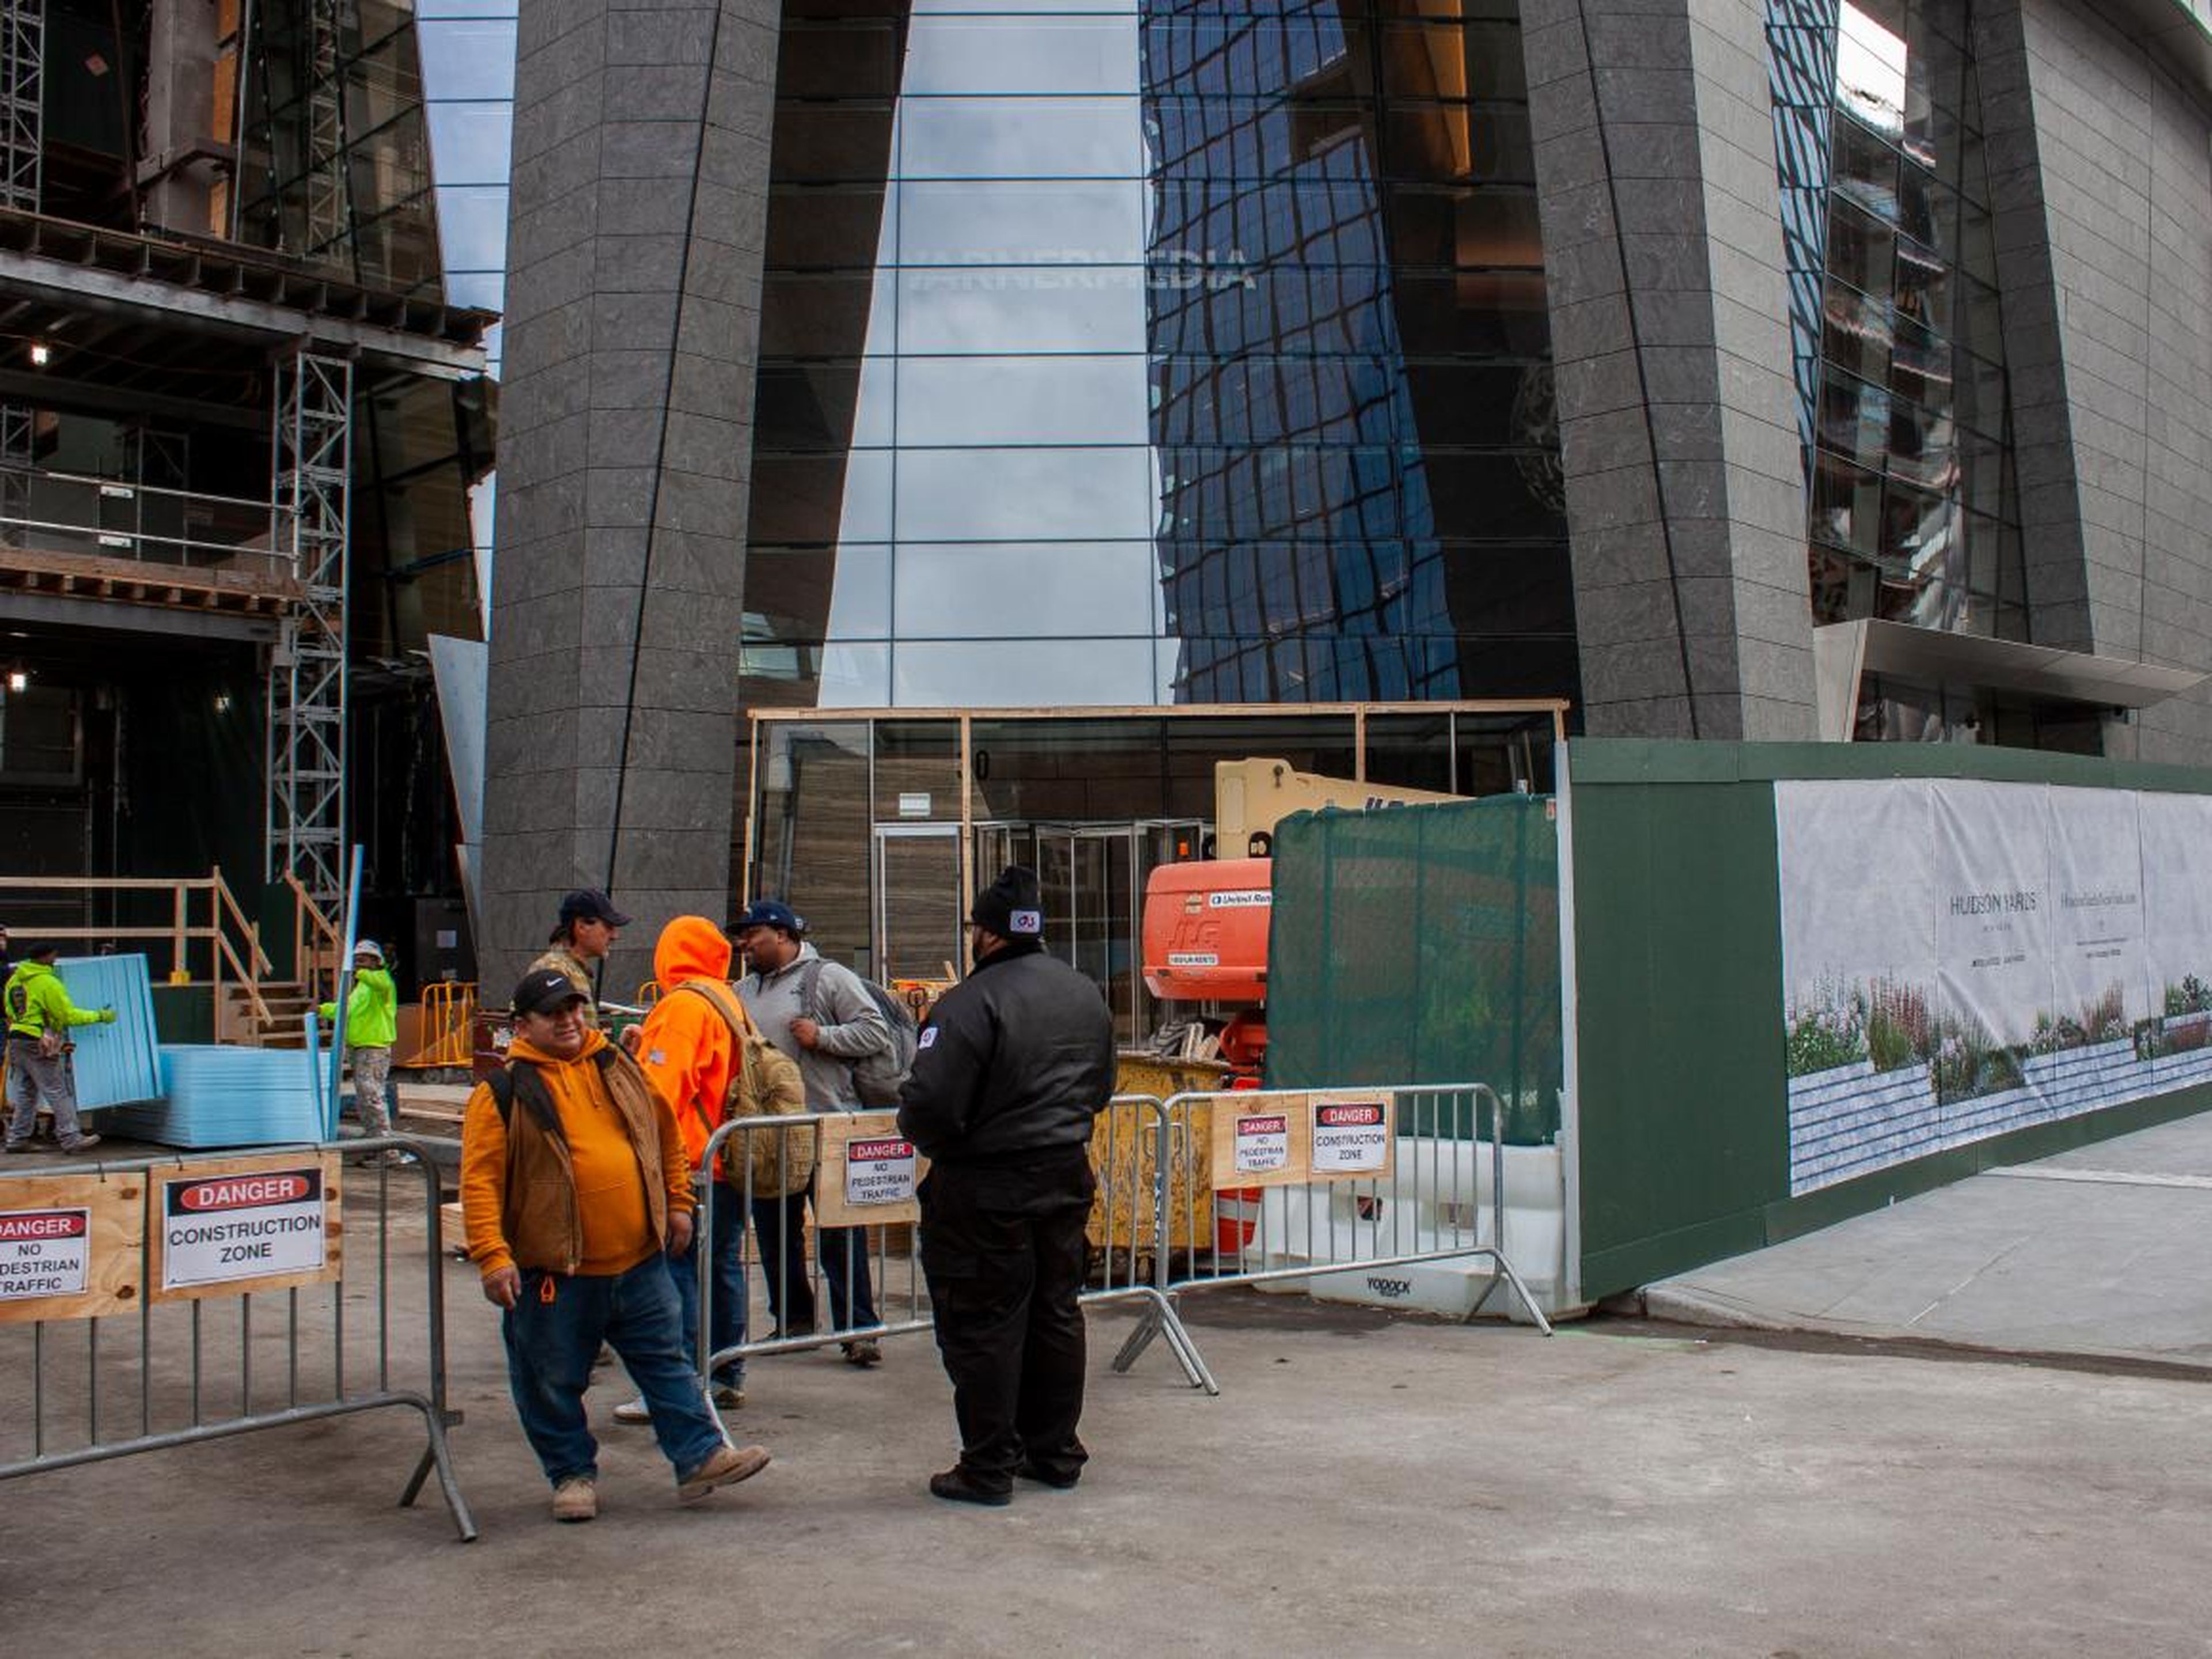 I also passed the still-under-construction 30 Hudson Yards, which will eventually house companies such as Warner Media, which includes CNN.